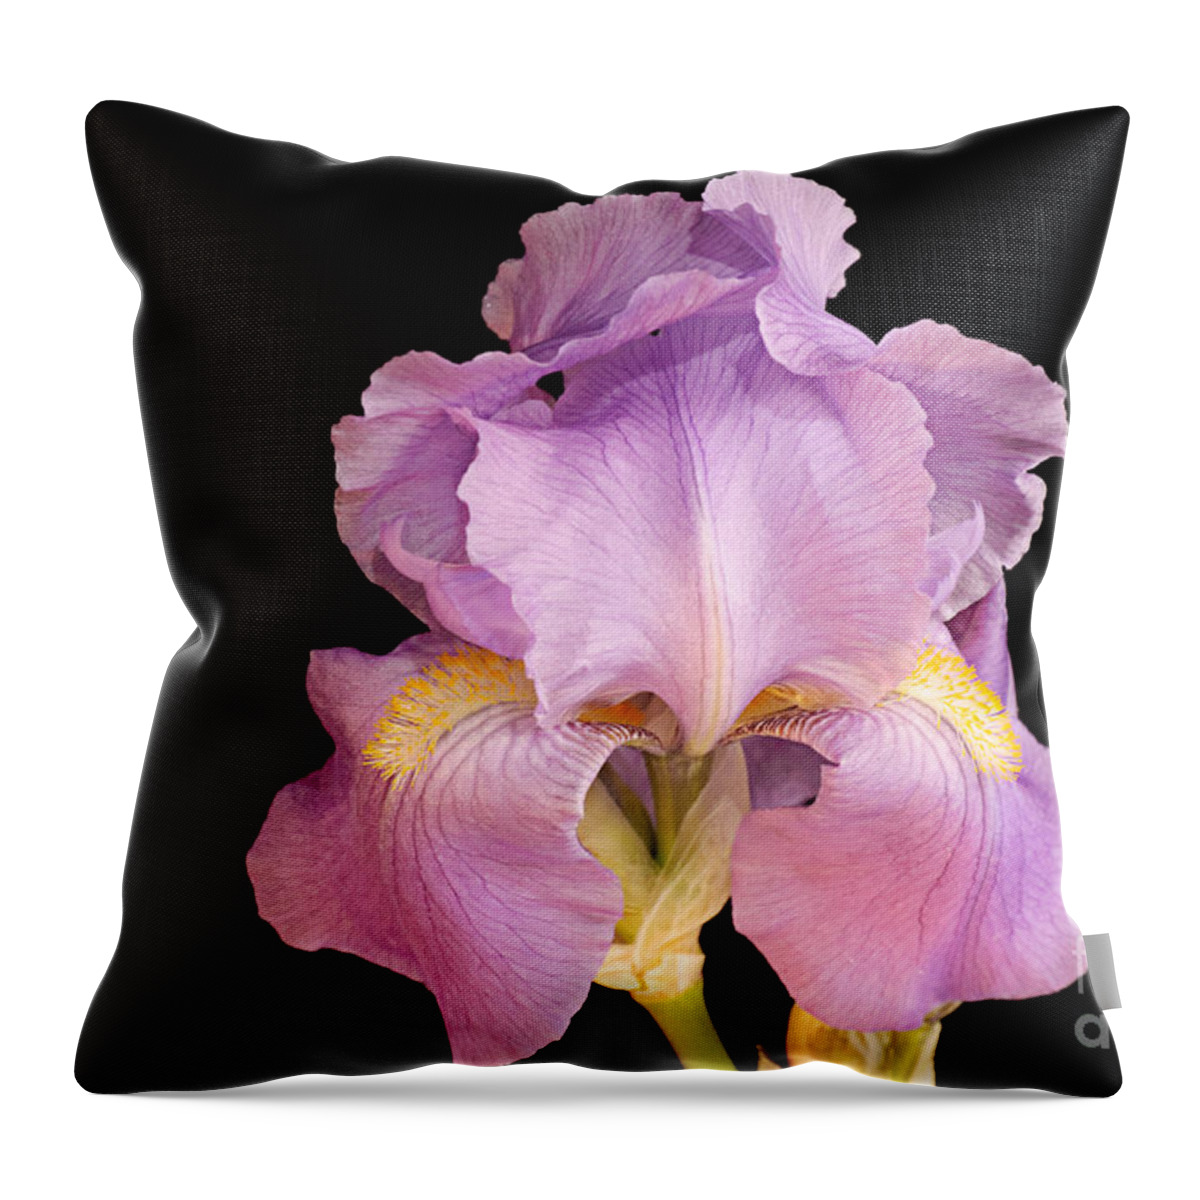 Andee Design Iris Throw Pillow featuring the photograph The Iris In All Her Glory by Andee Design